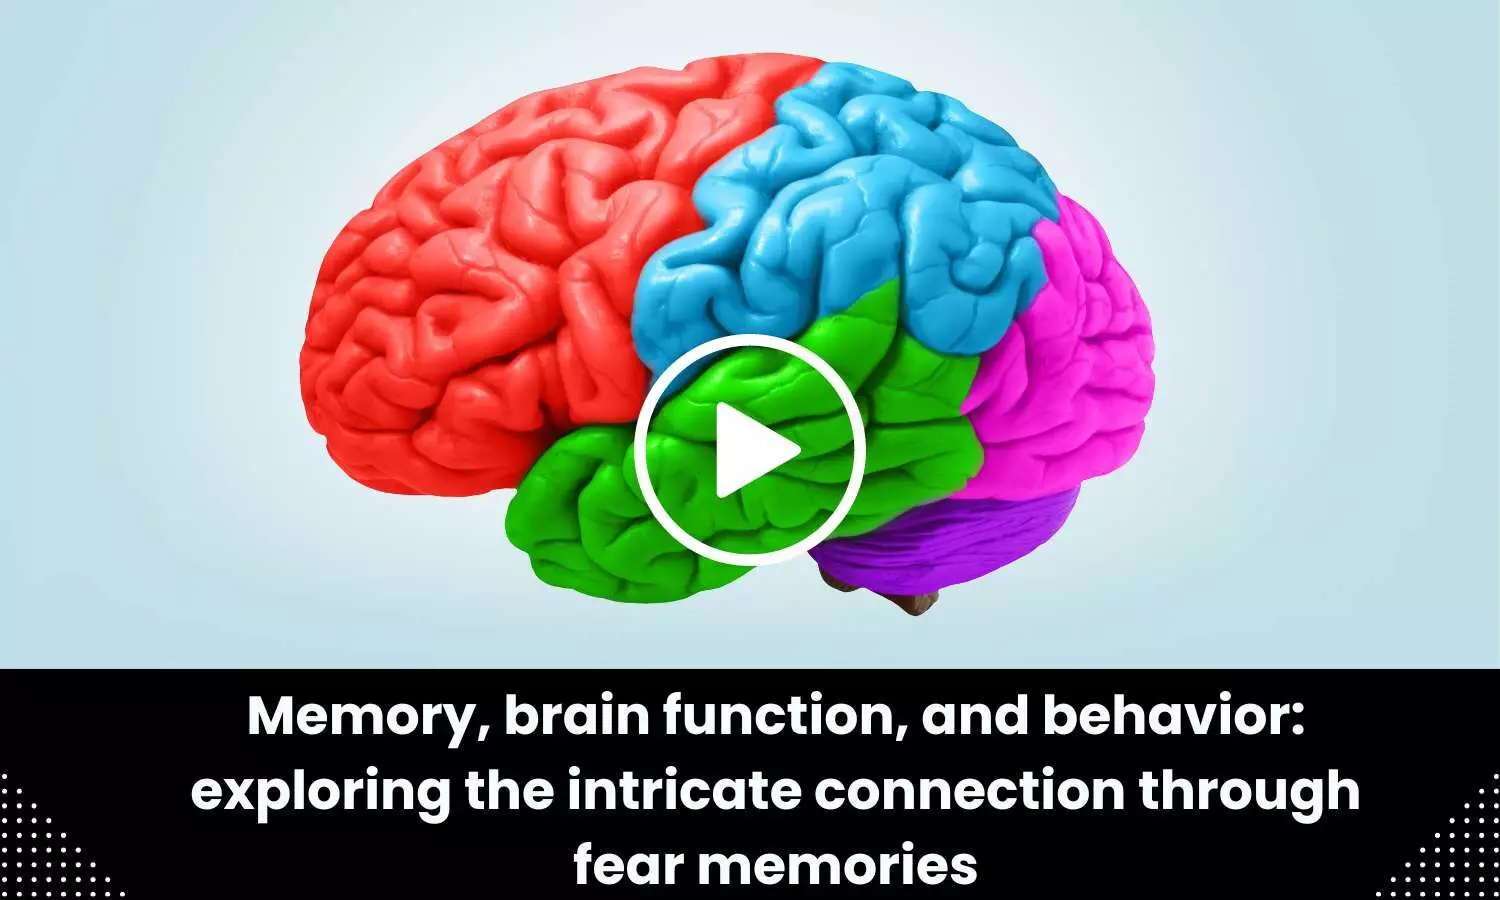 Memory, brain function, and behavior: exploring the intricate connection through fear memories